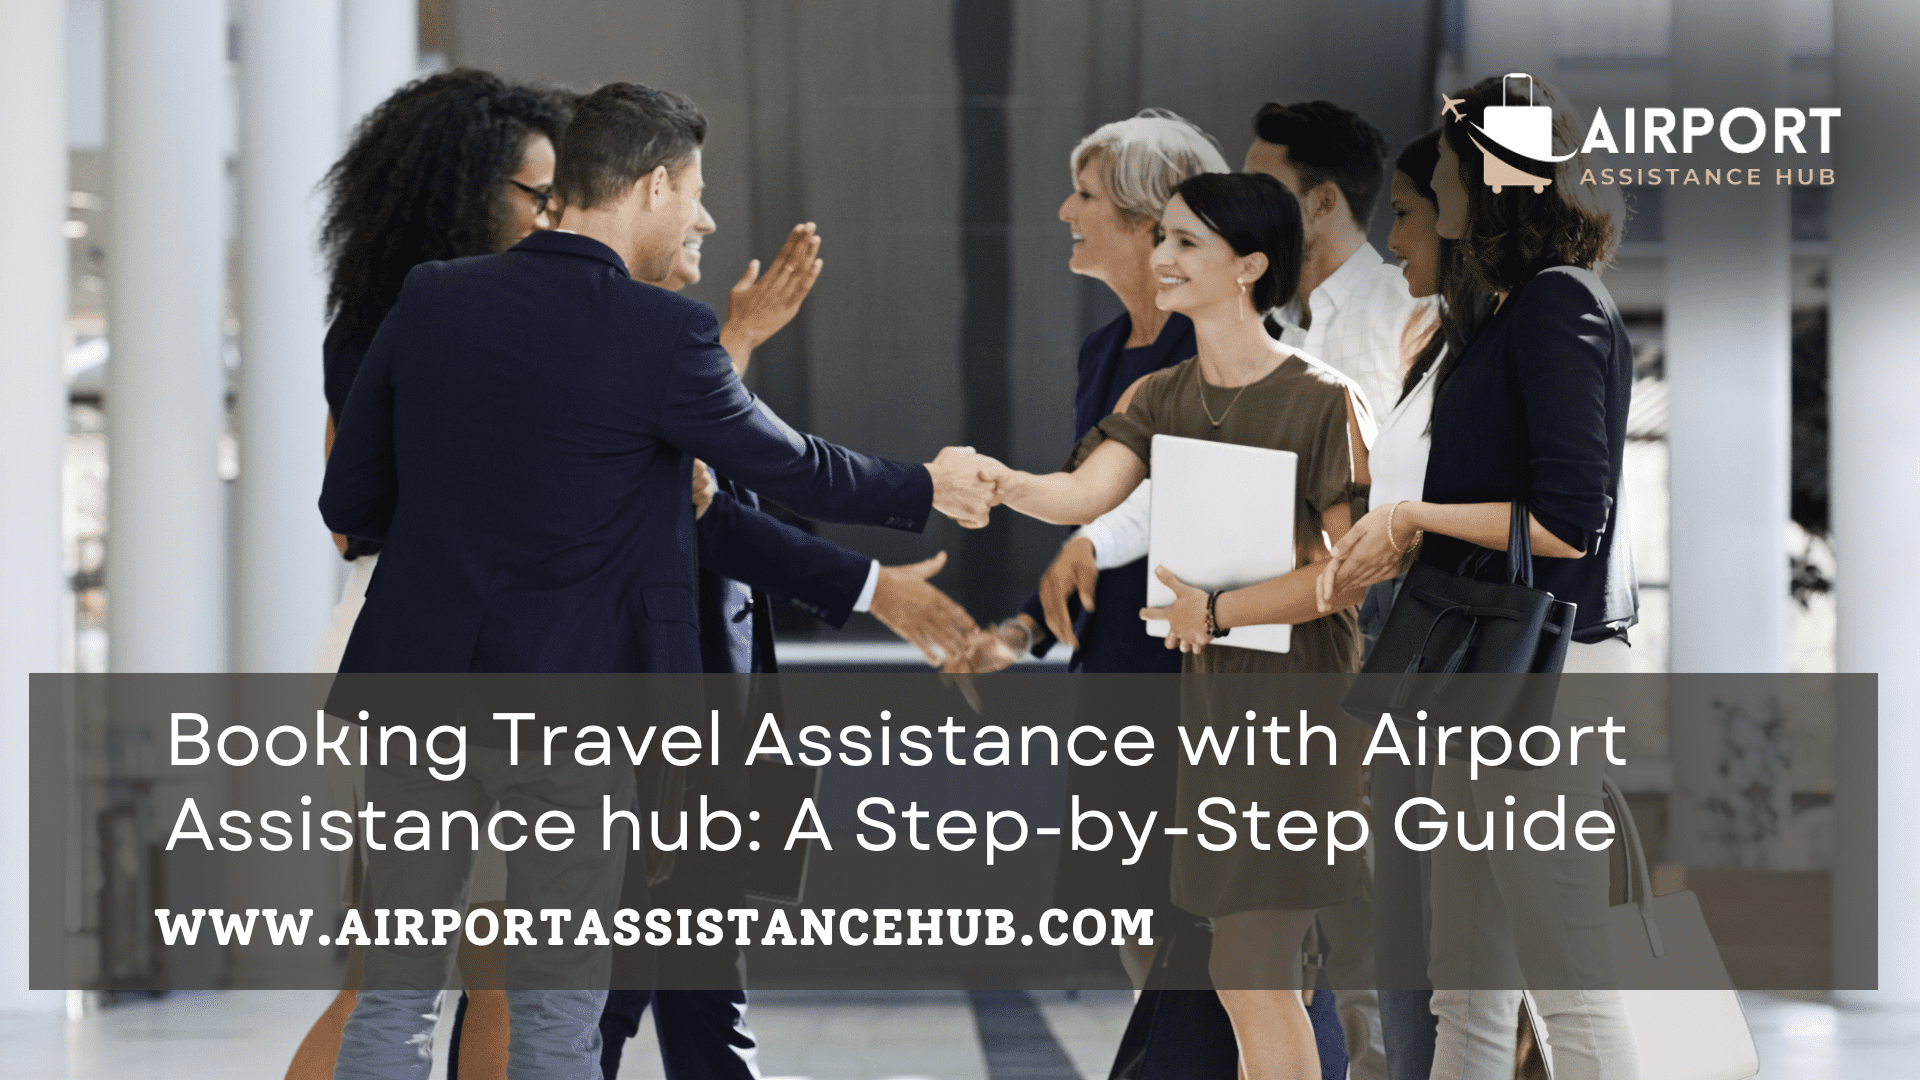 Booking Travel Assistance with Airport Assistance Hub: A Step-by-Step Guide